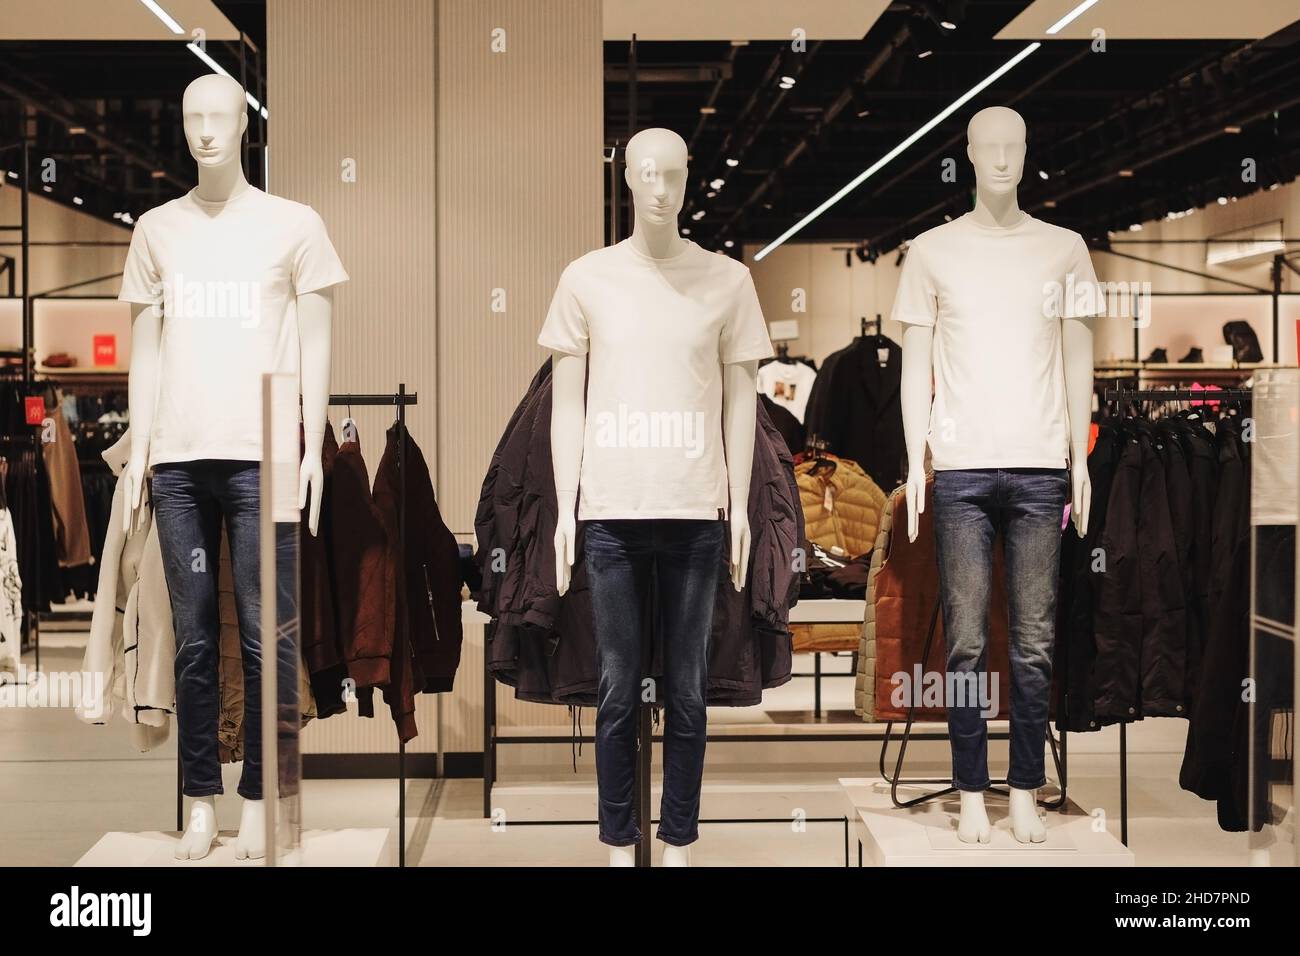 Male mannequins in casual clothes stand in a clothing store. Mannequins ...